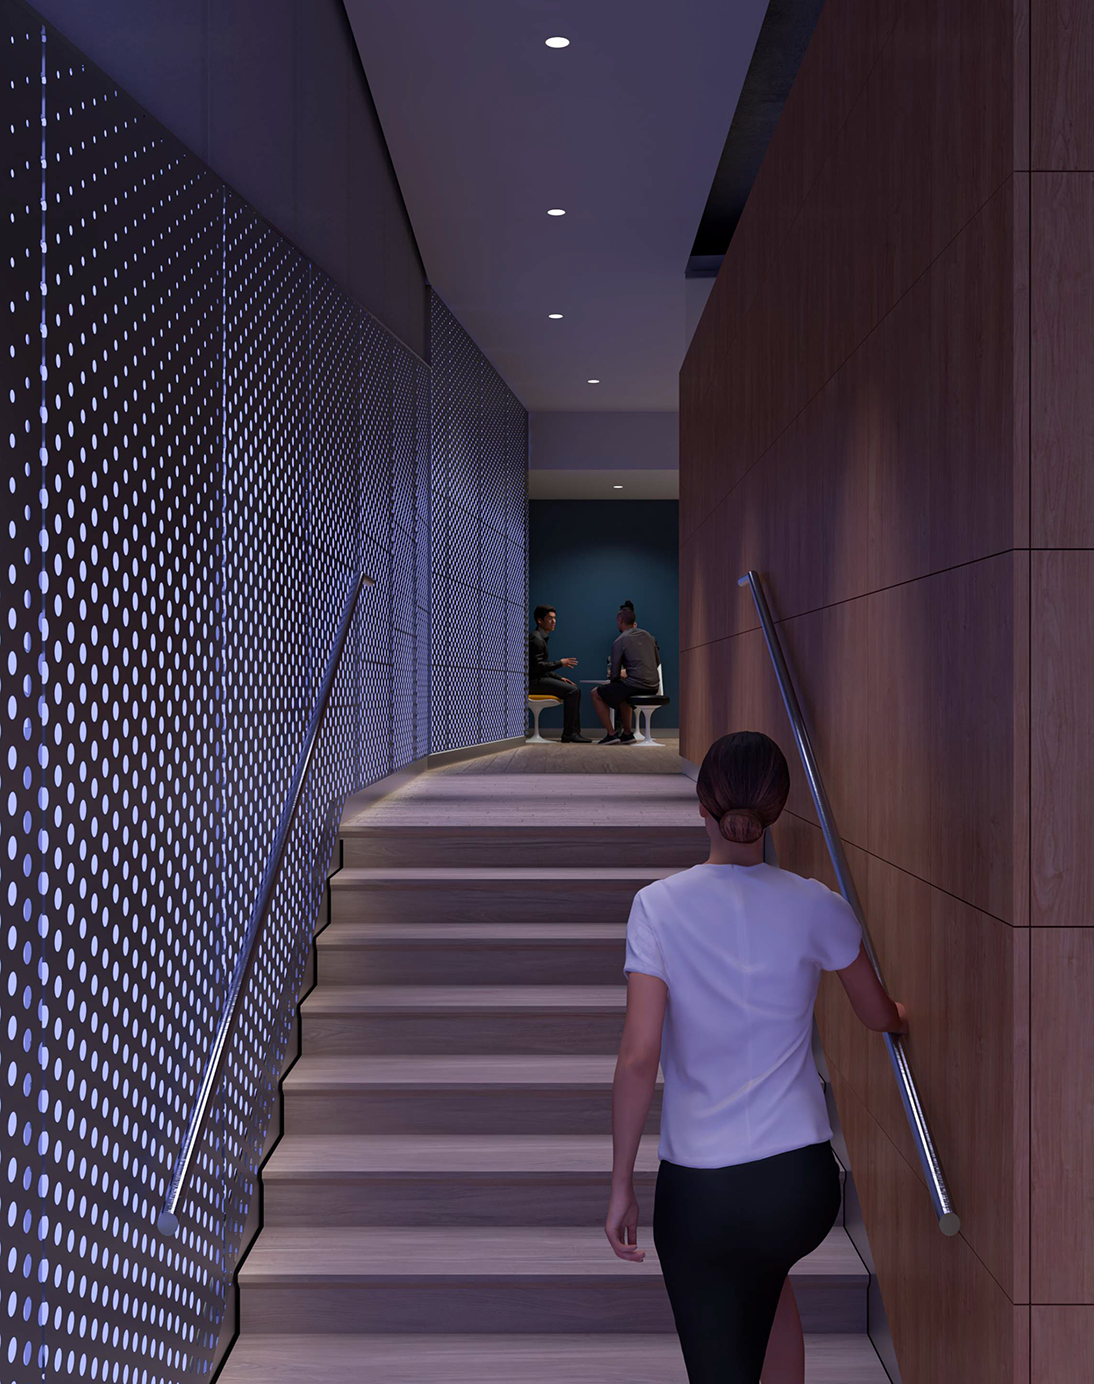 A student uses the new staircase from the lower level to the entrance